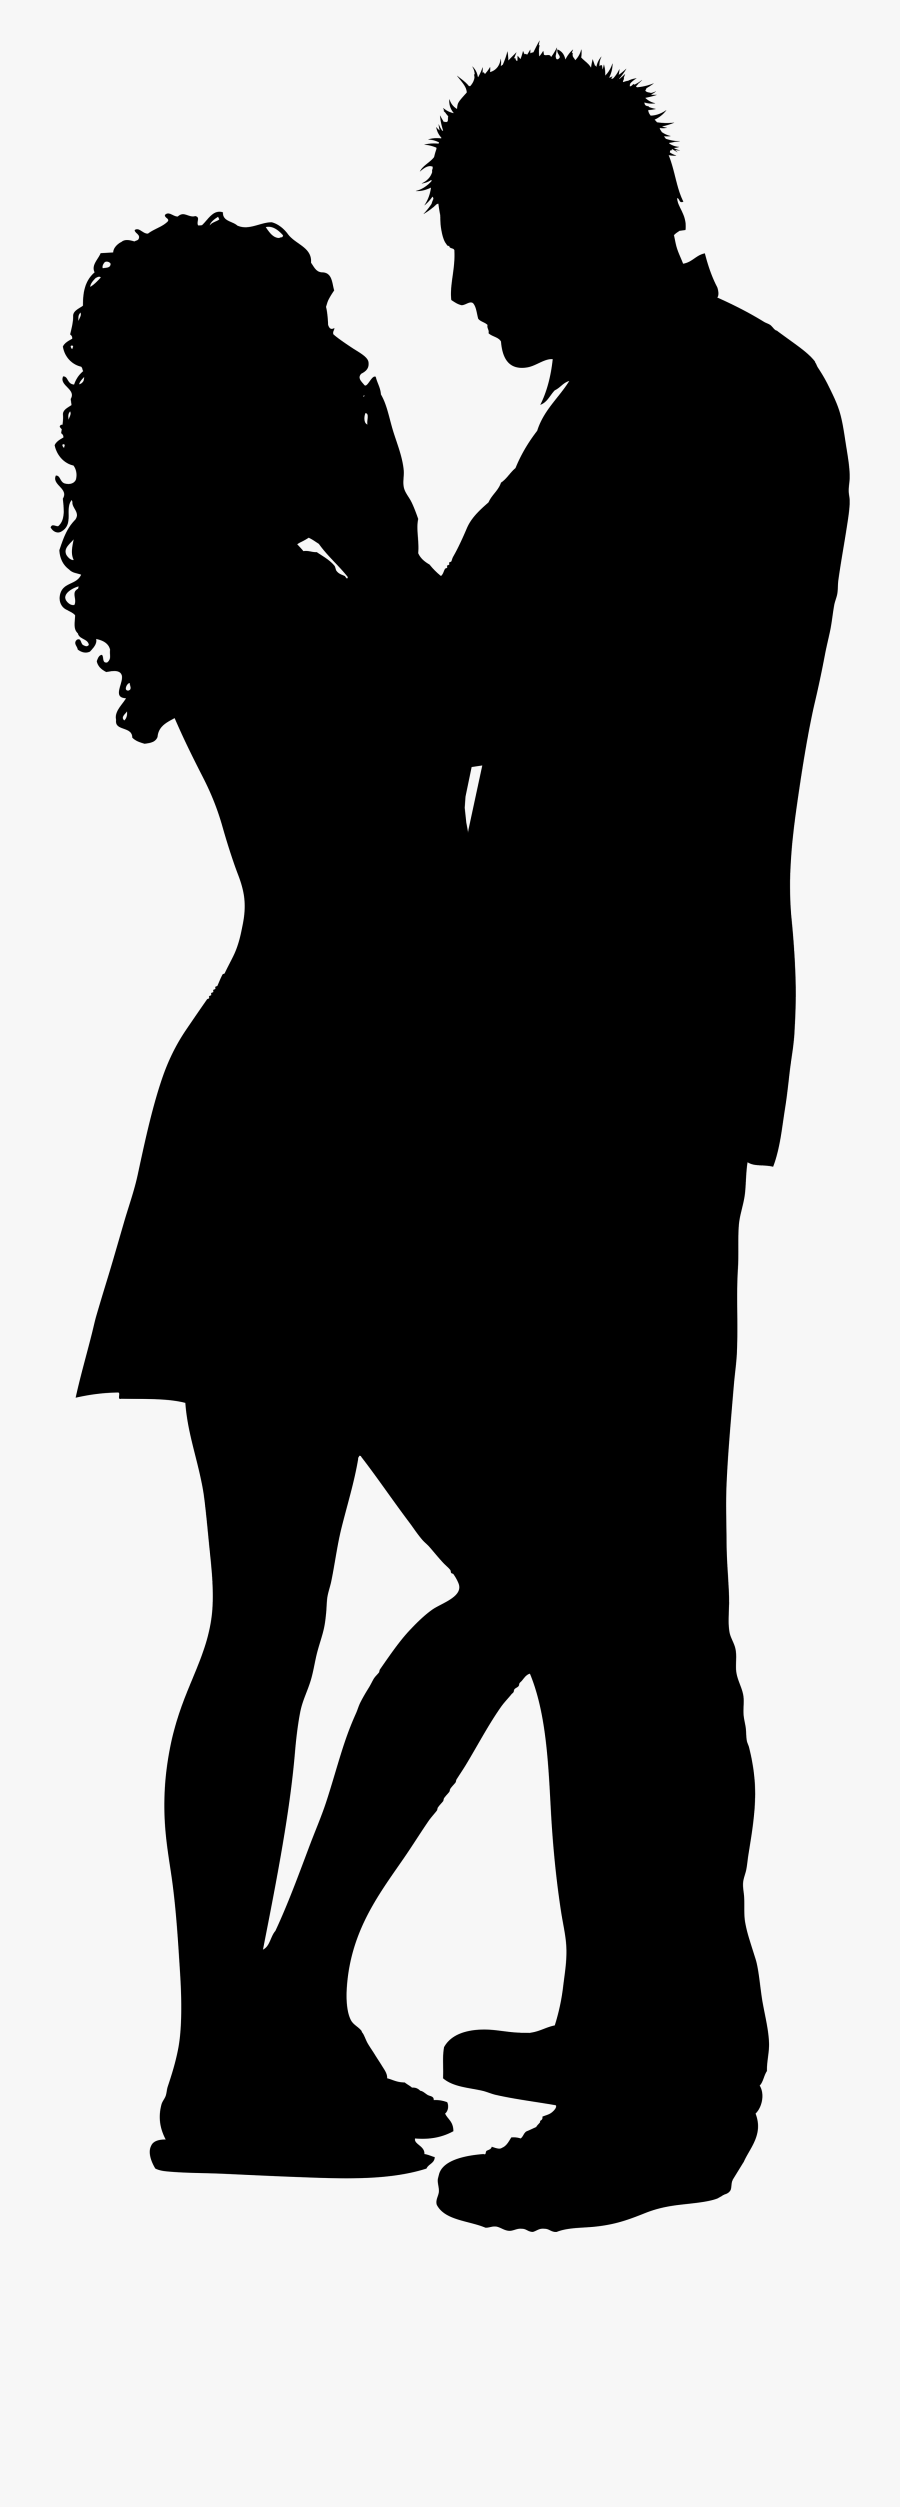 Collection Of Silhouette - Couple Silhouette Png Transparent, Transparent Clipart